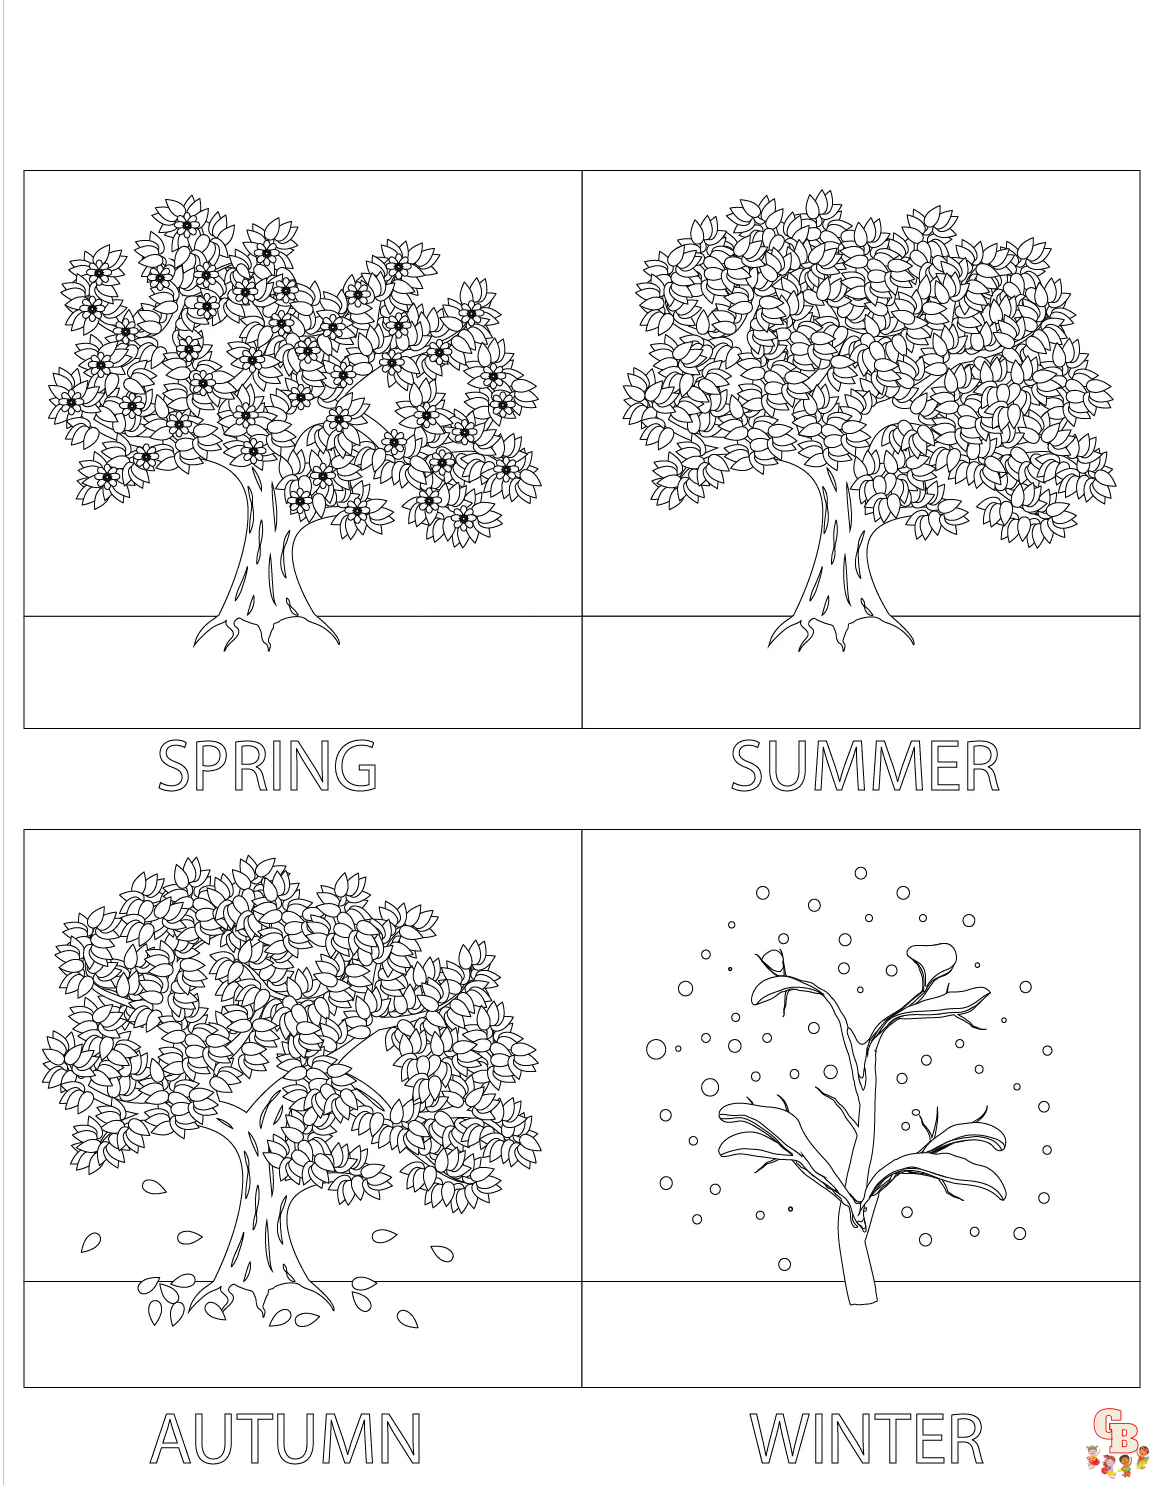 Seasons Coloring Pages 2